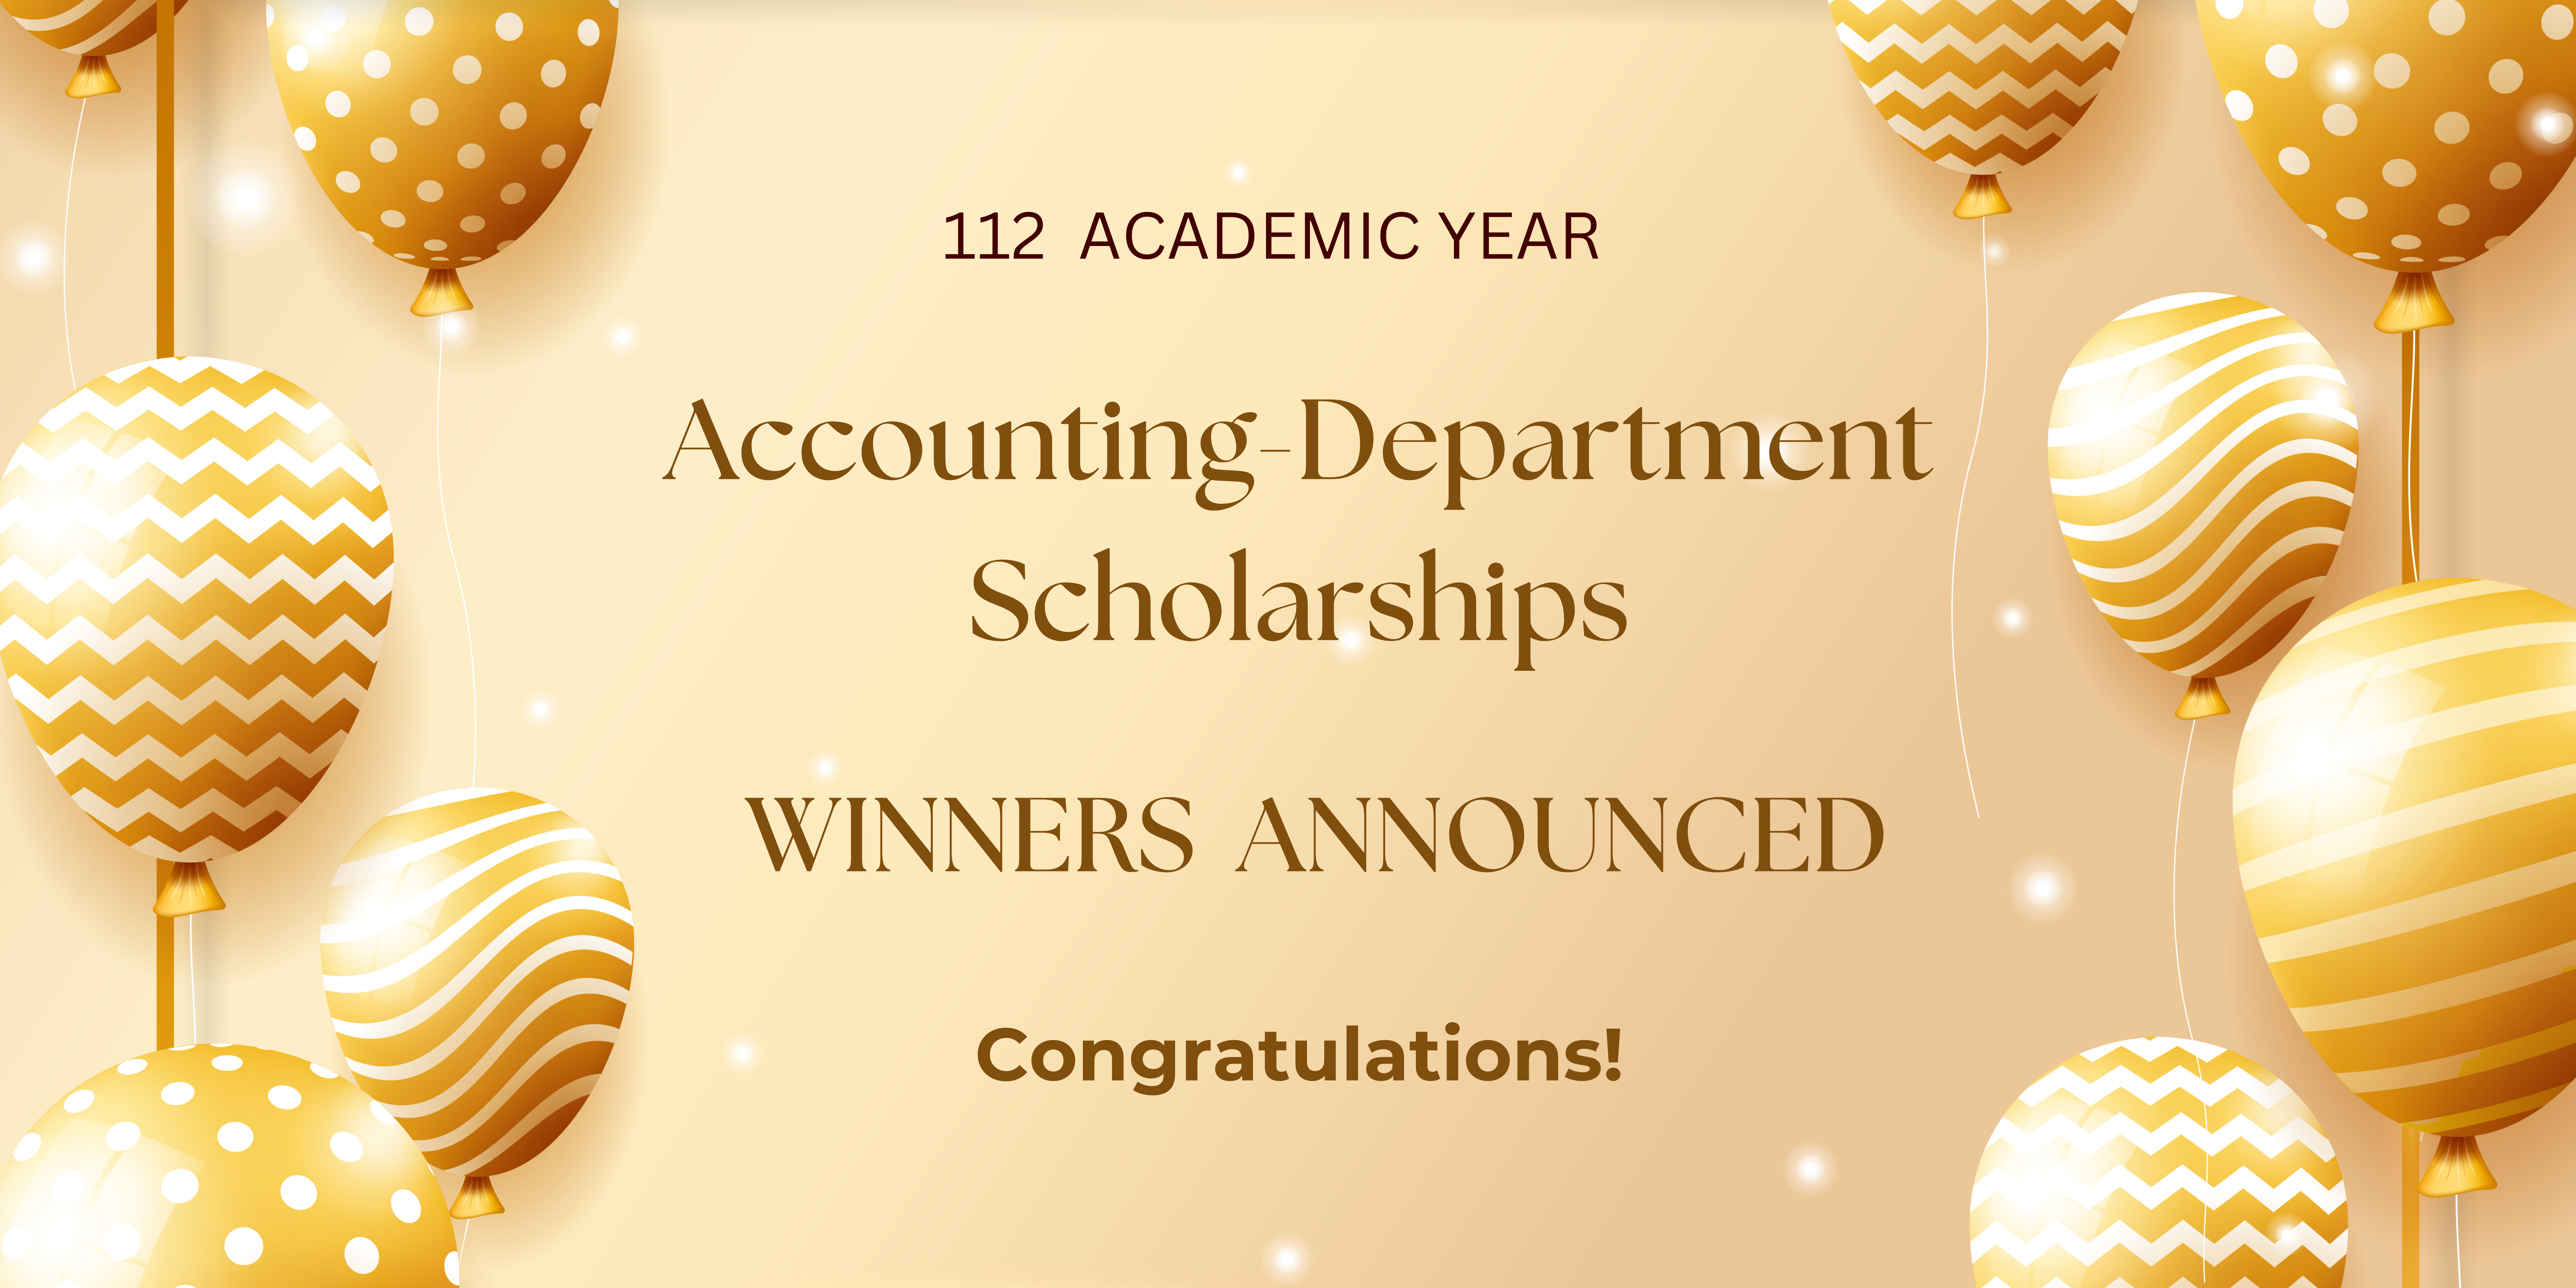 Featured image for “Congratulations to the Winners of Accounting-Department Scholarships for the Spring Semester of the 112 Academic Year”